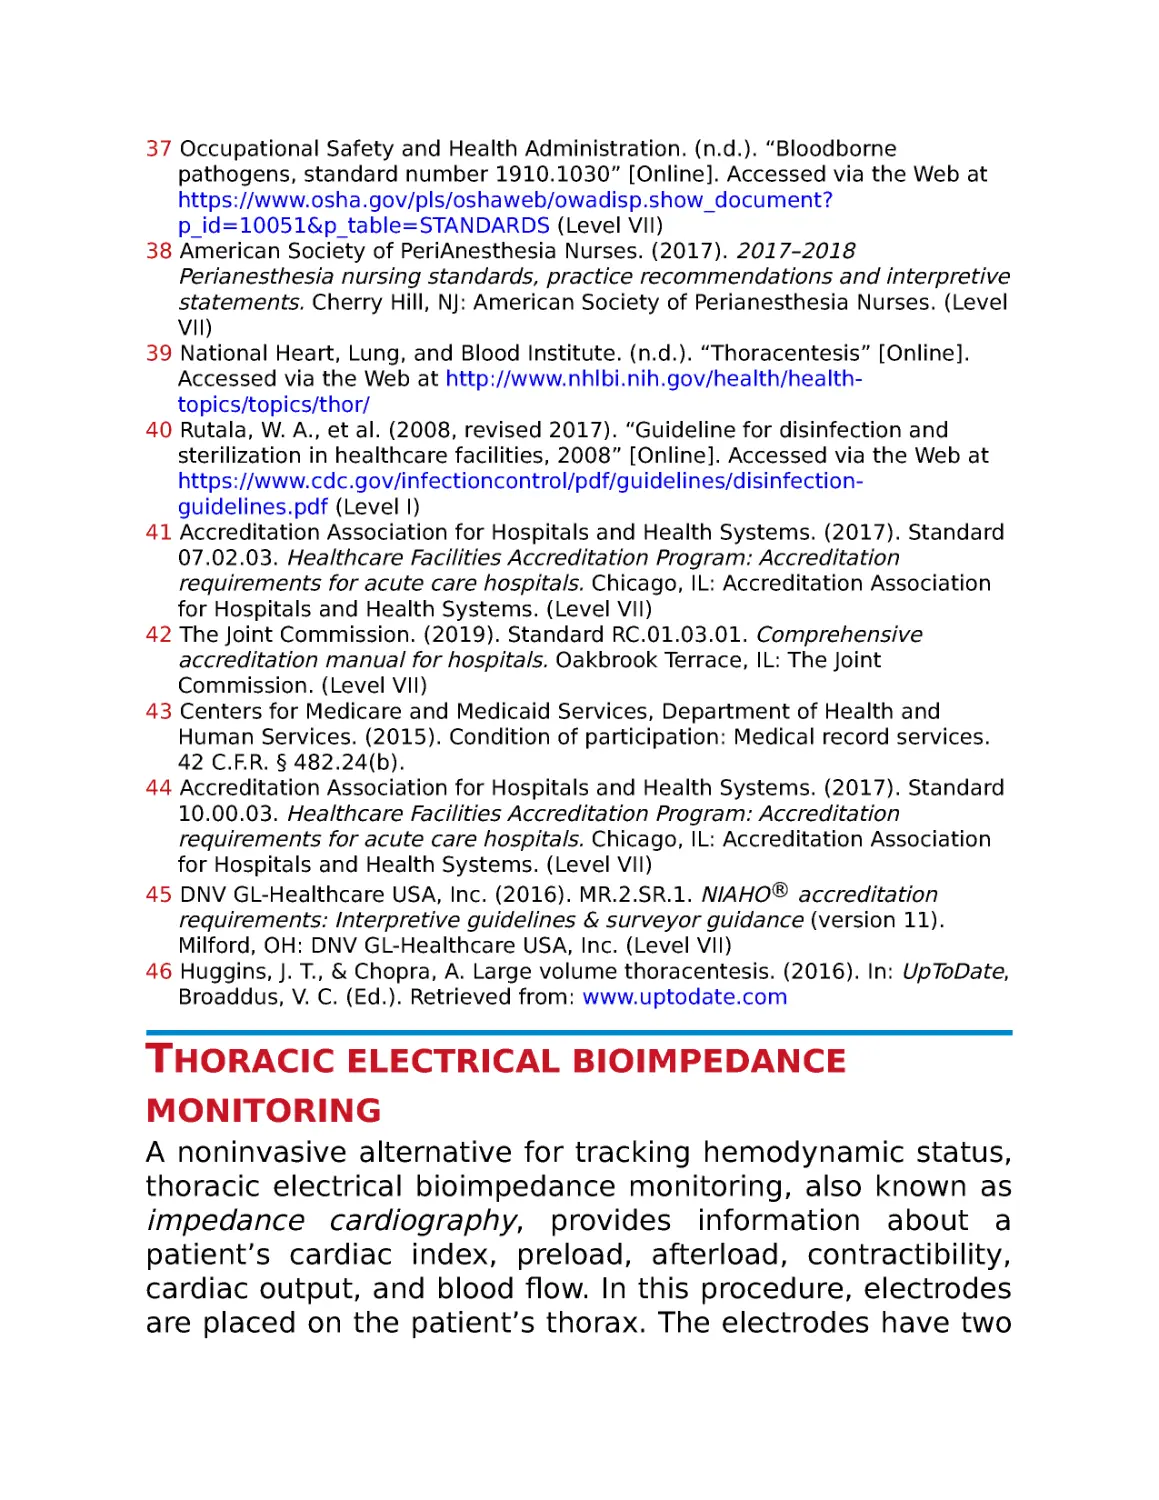 Thoracic electrical bioimpedance monitoring